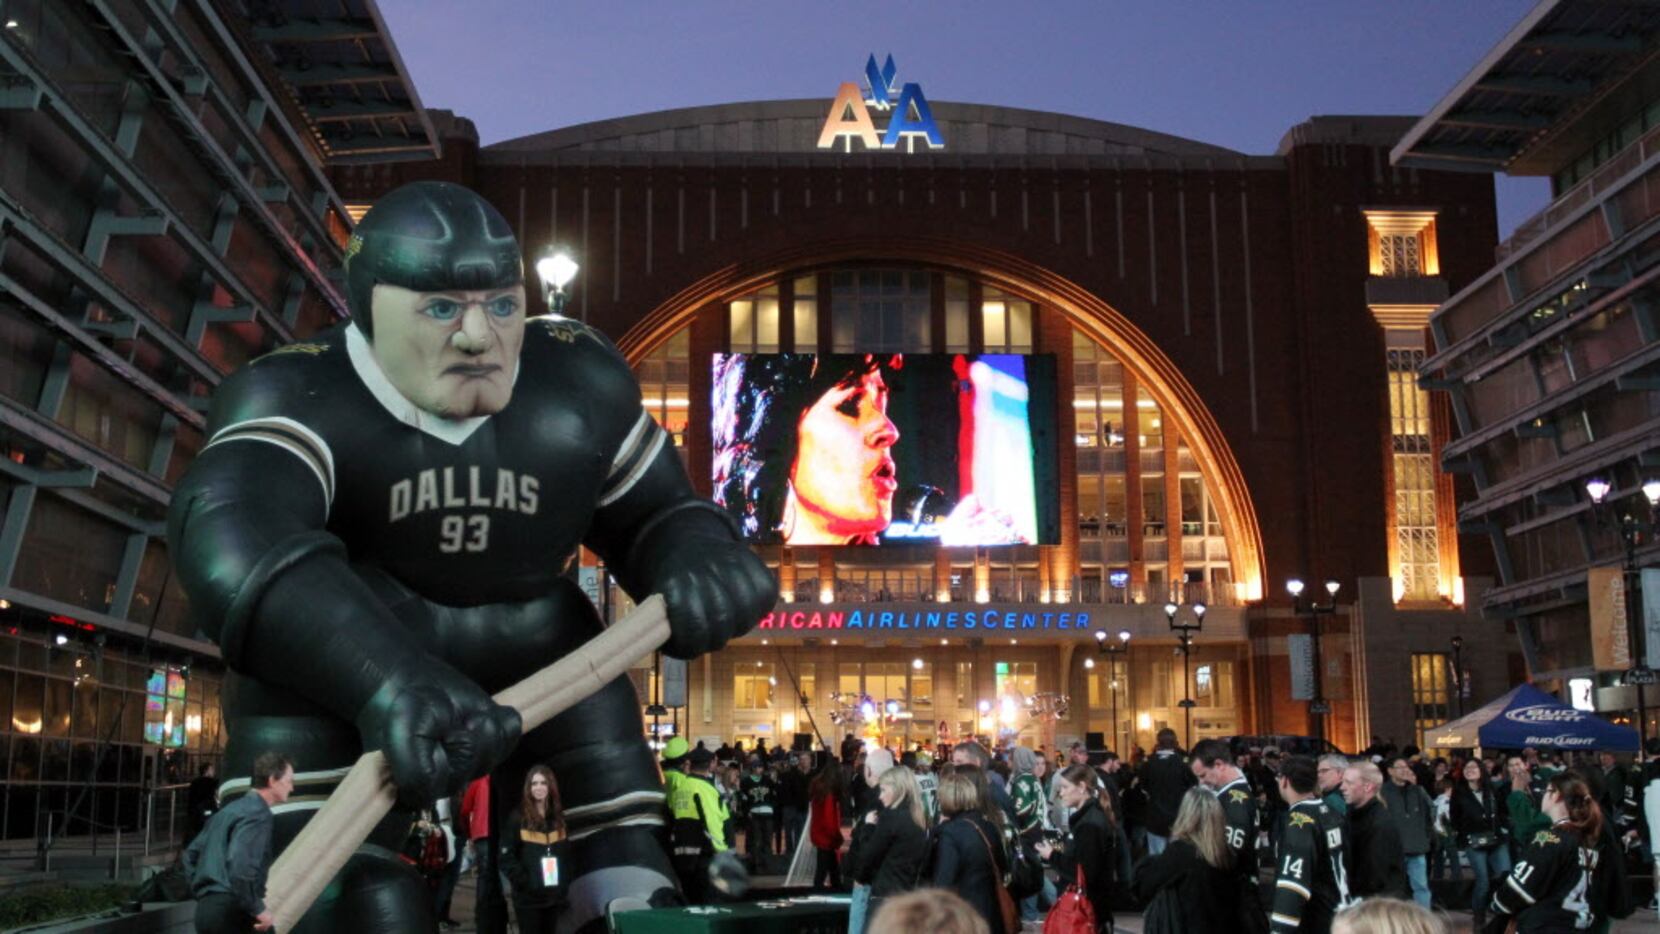 TIMELAPSE: Watch as AAC transitions from Mavericks to Stars game